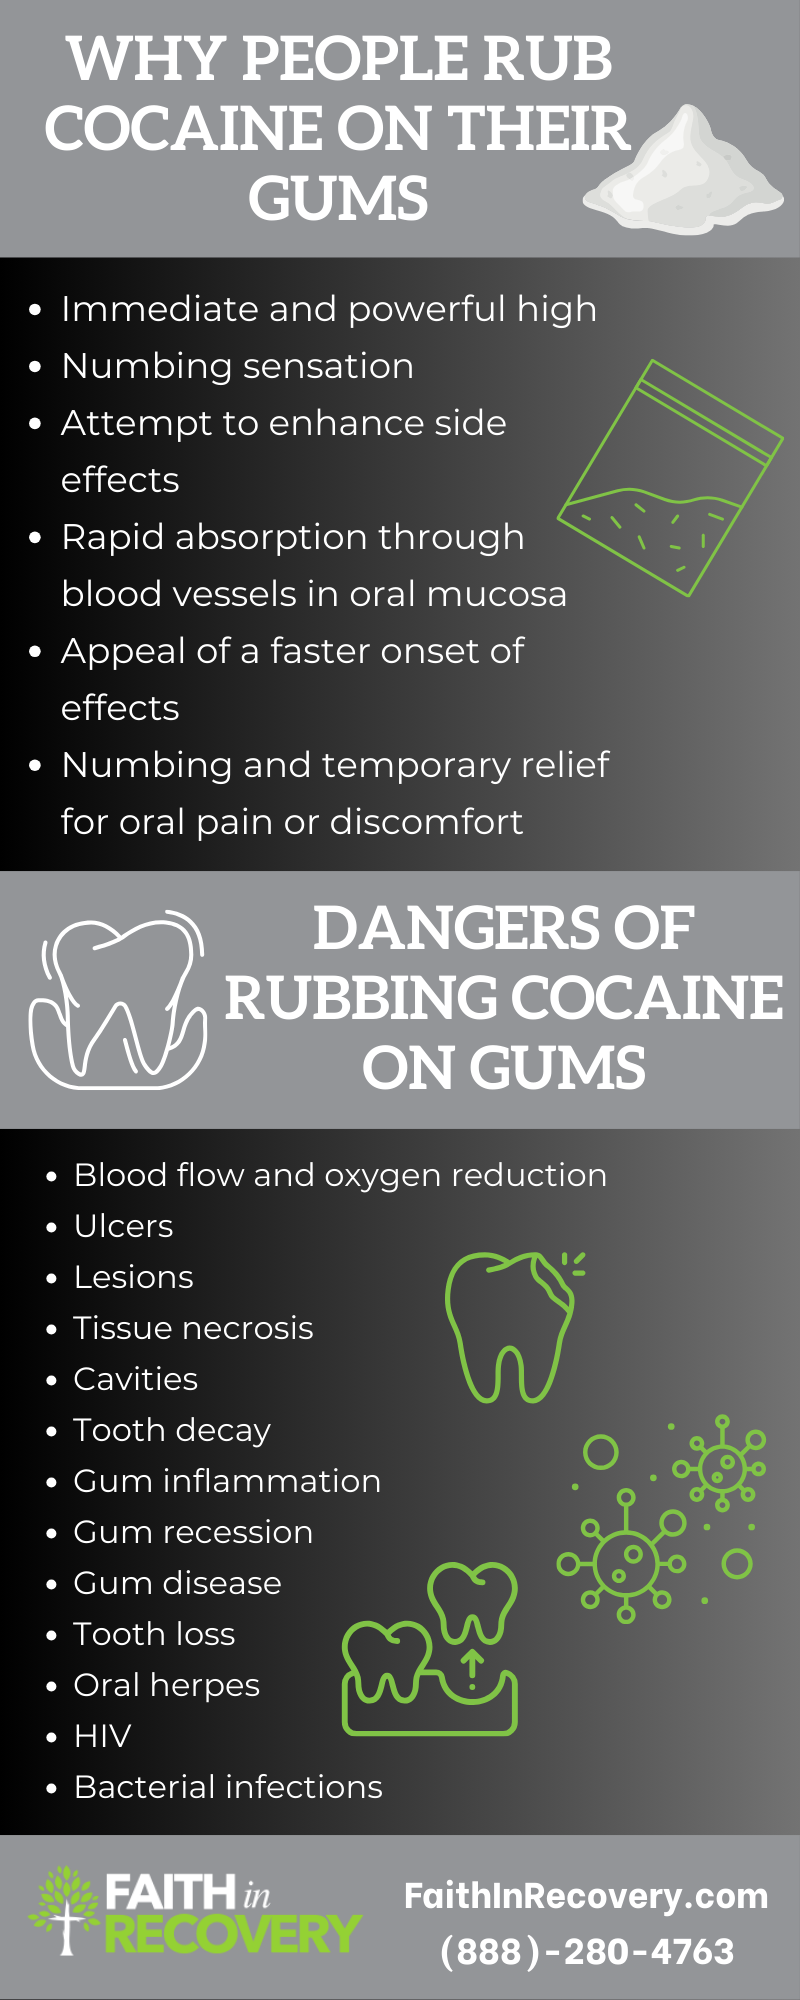 infographic about why people rub cocaine on their gums